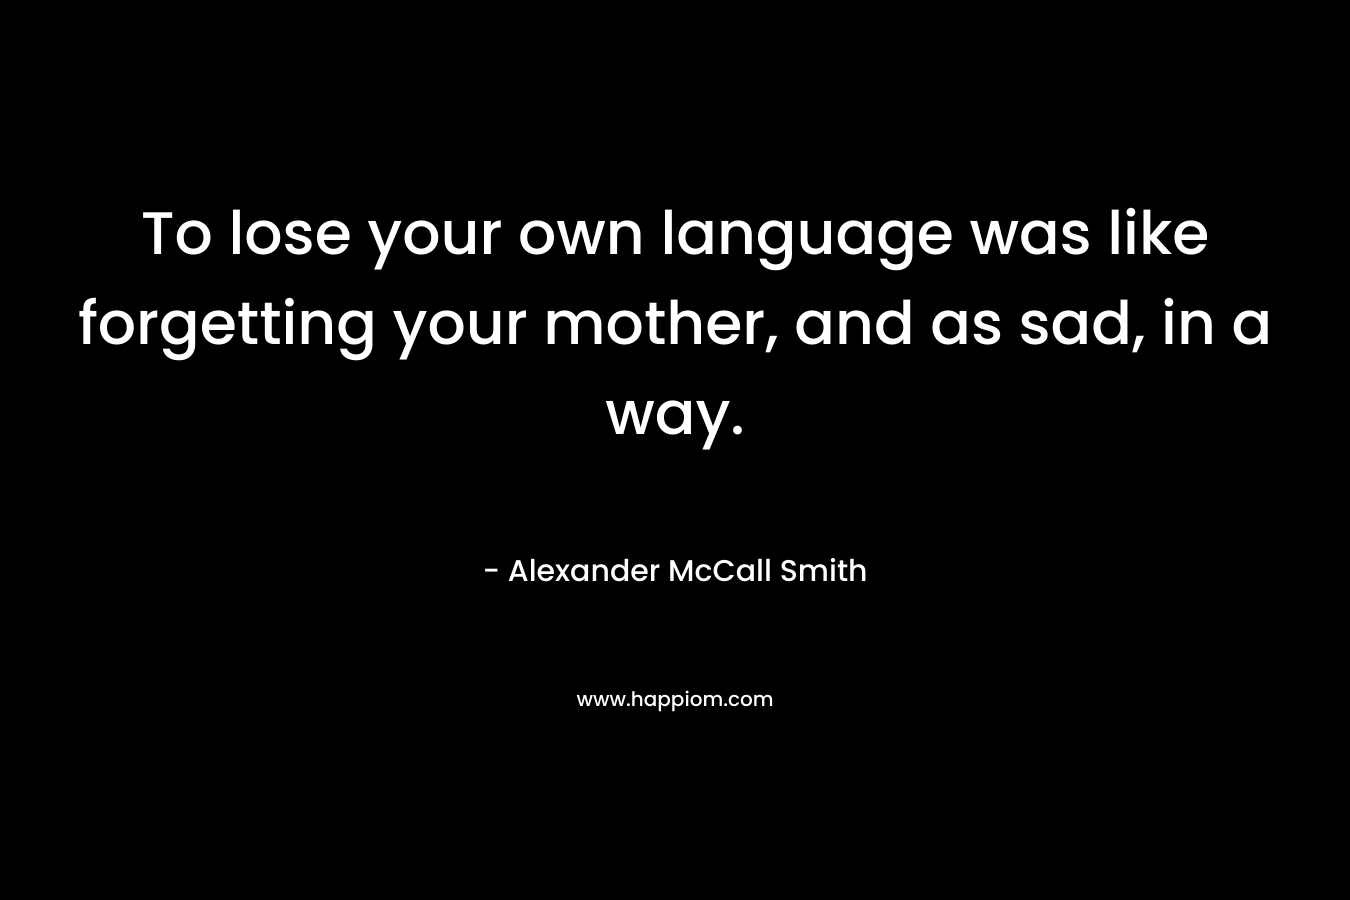 To lose your own language was like forgetting your mother, and as sad, in a way.